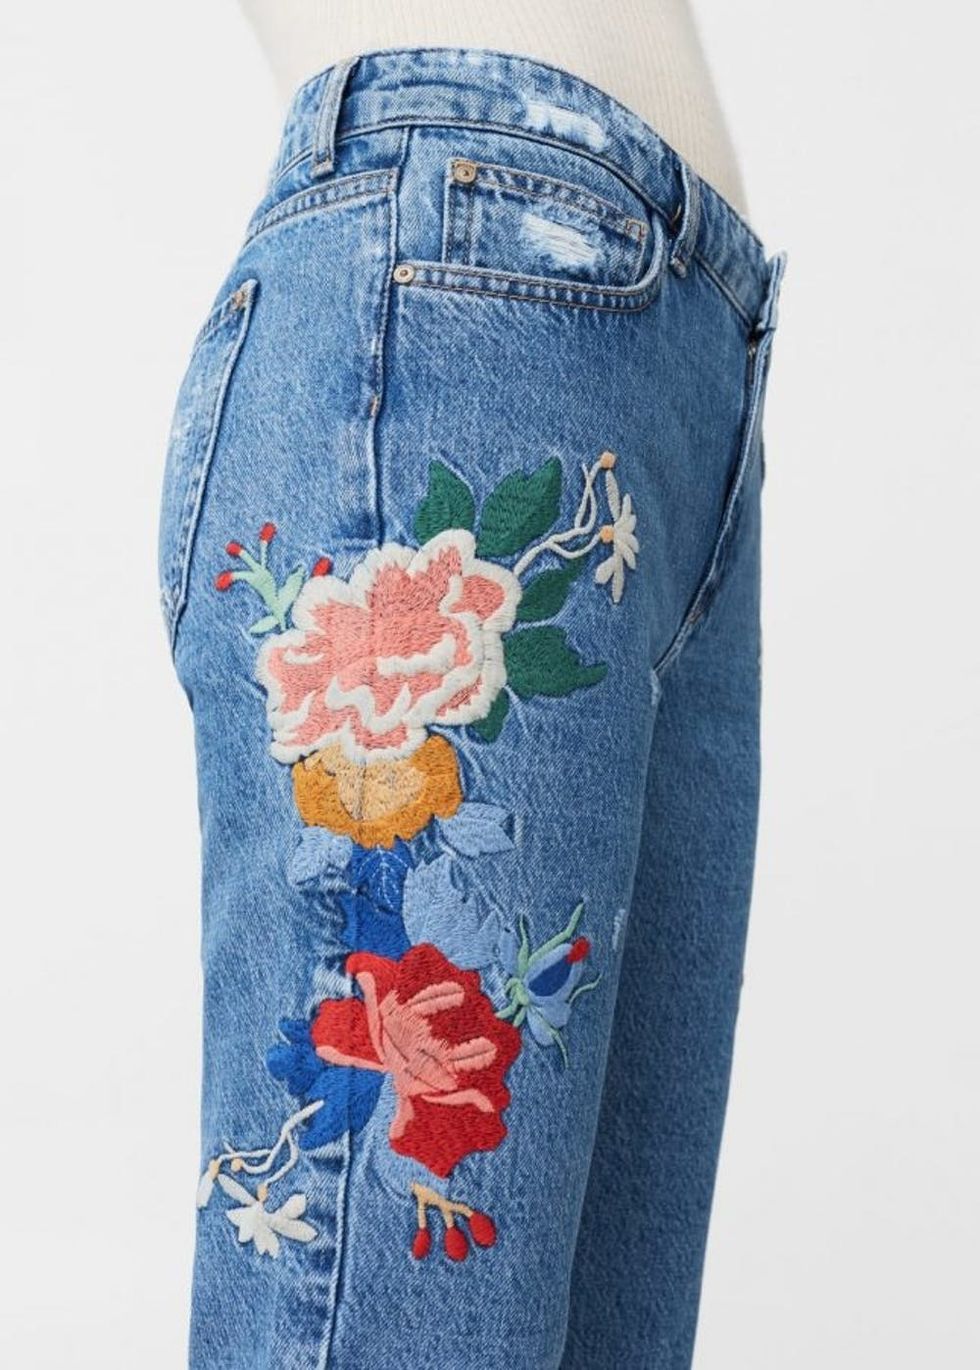 11 Must-Have Pairs of Patchwork Jeans to Snag RN - Brit + Co